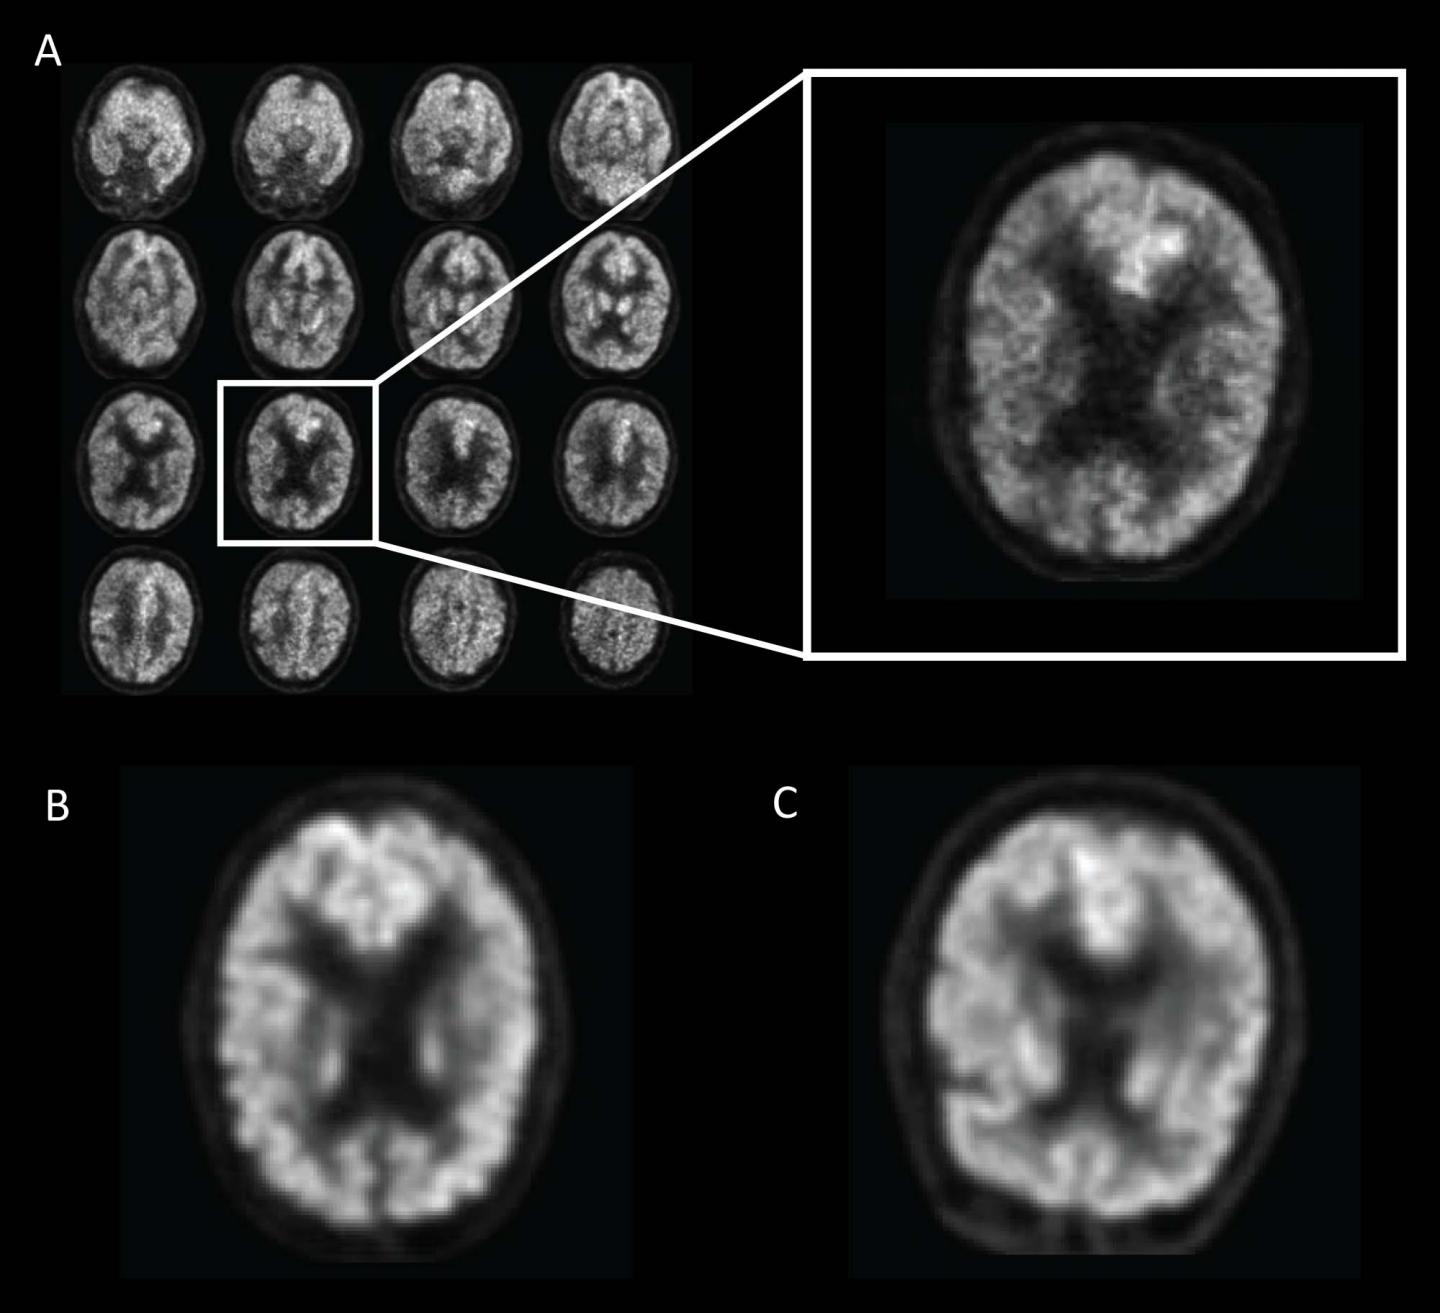 Example of Fluorine 18 fluorodeoxyglucose PET Images from Alzheimer's Disease